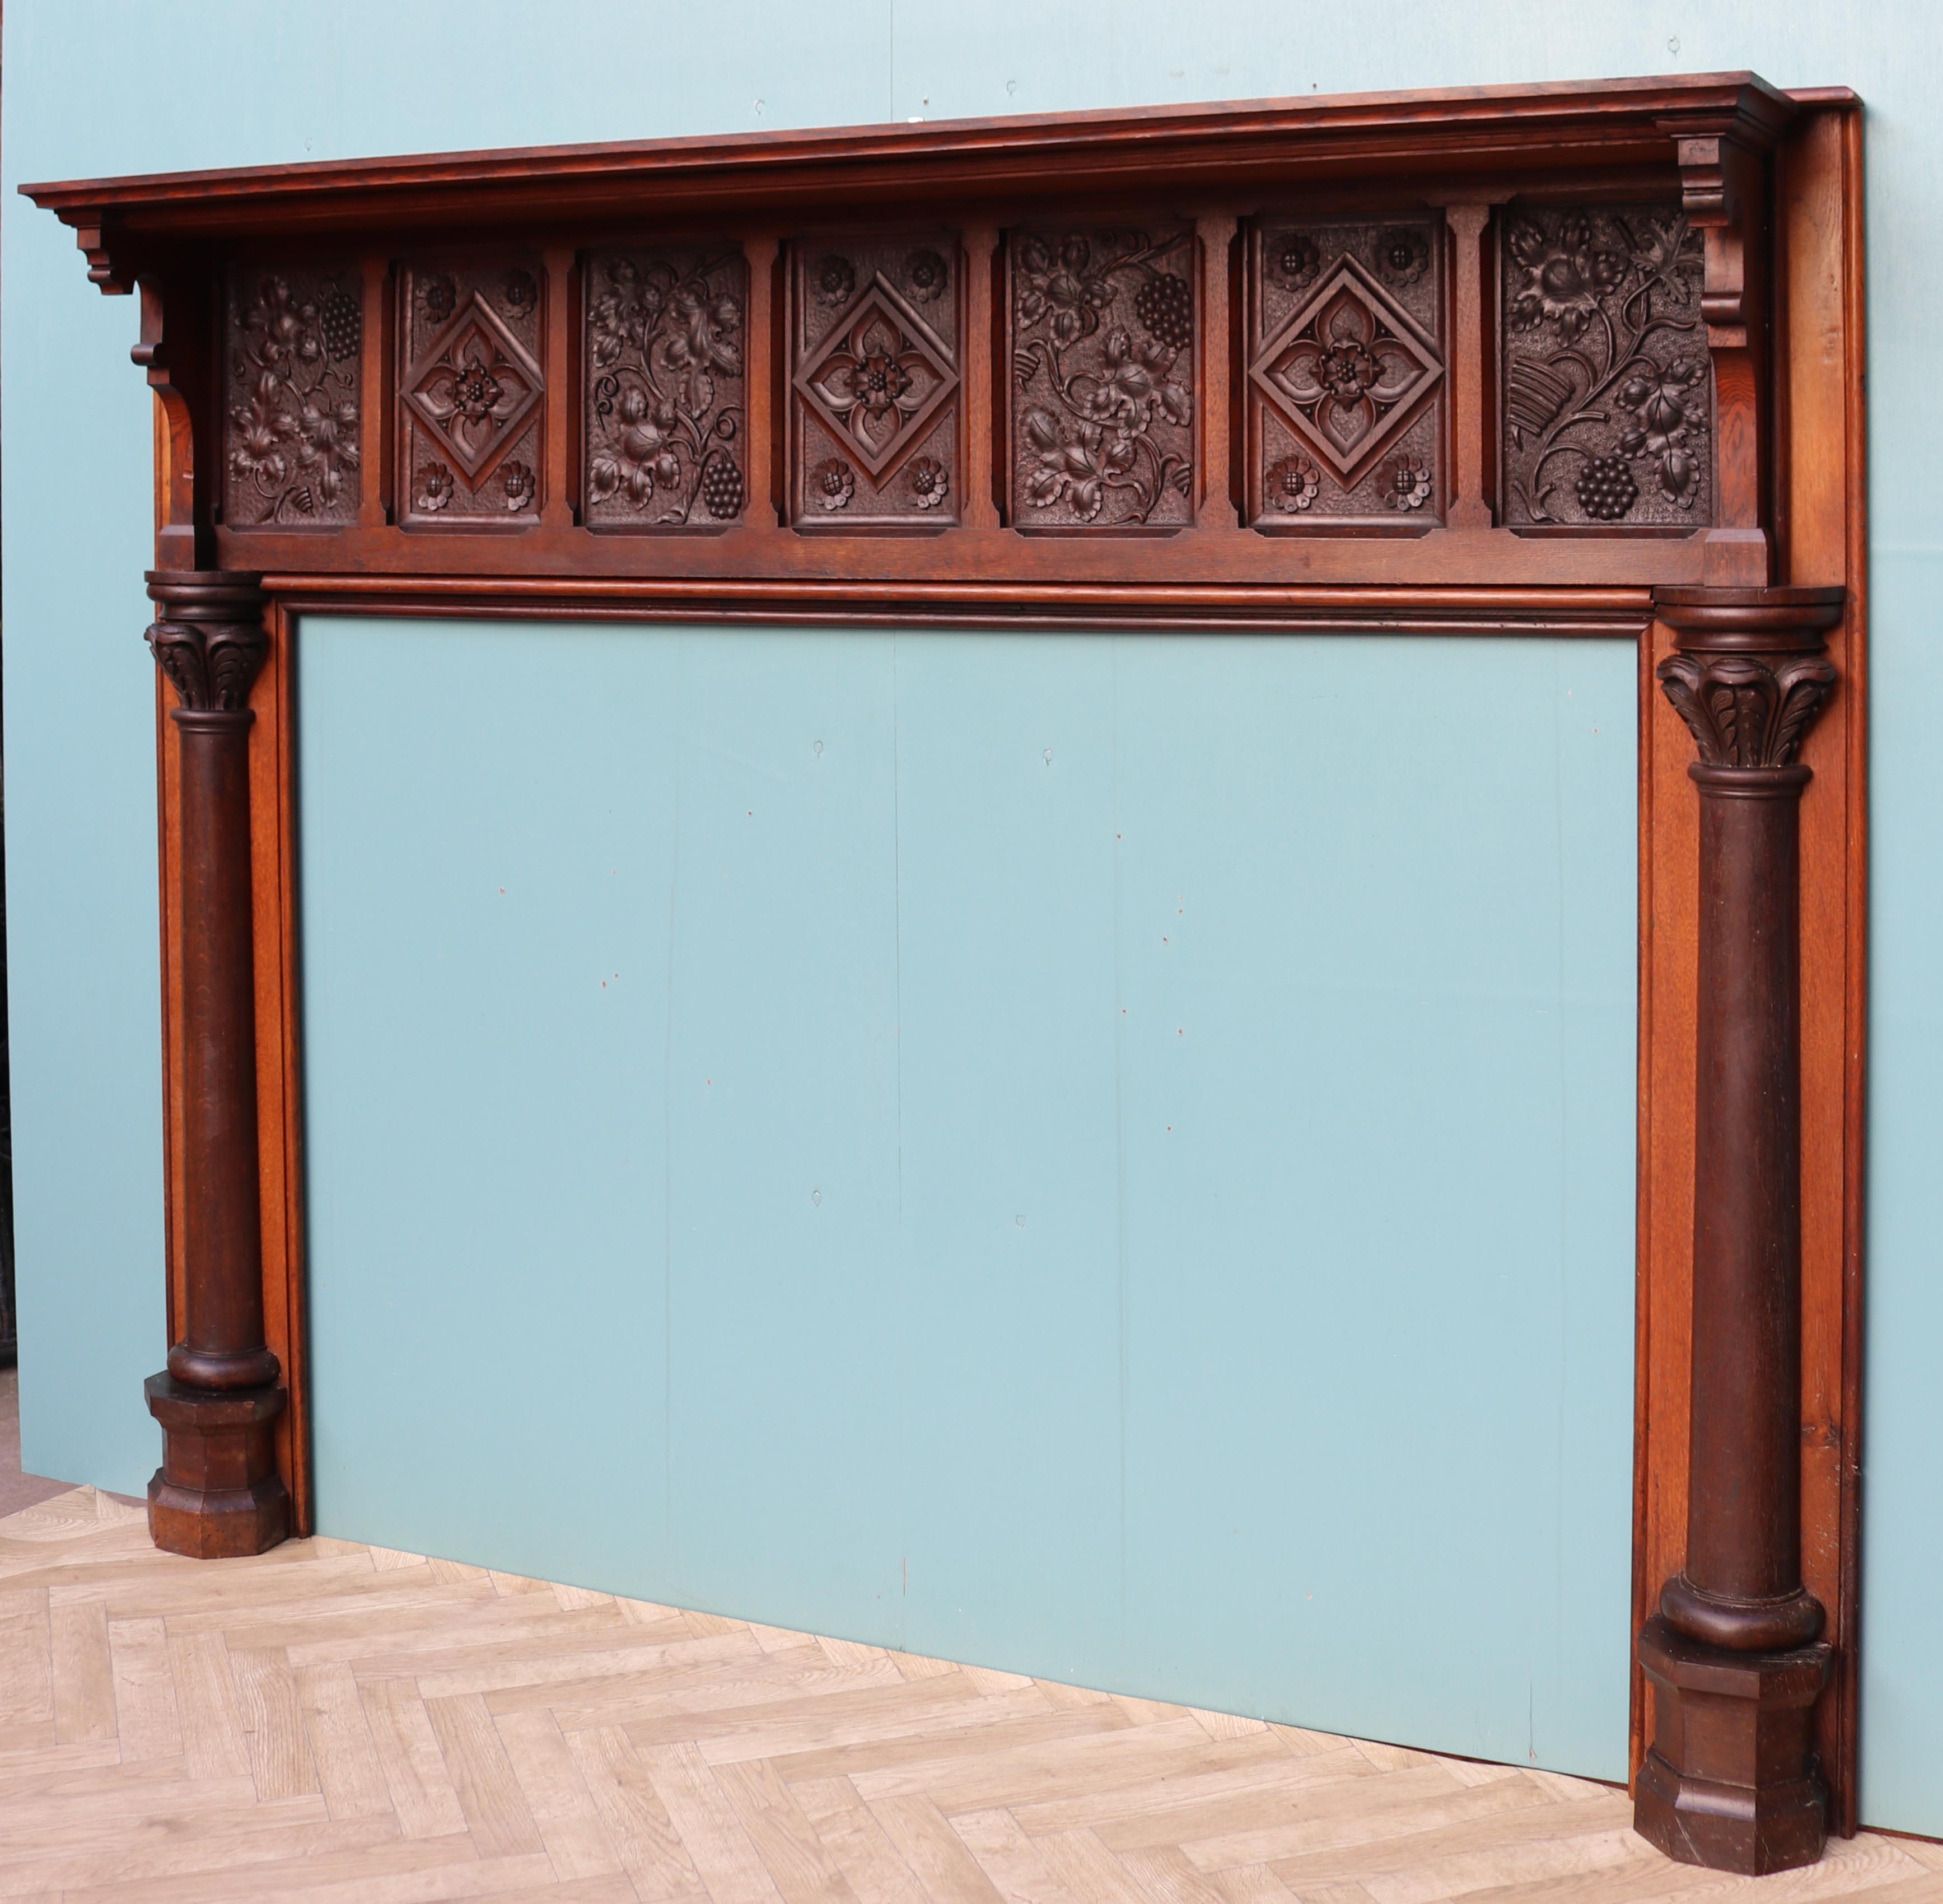 19th Century English Arts and Crafts Style Carved Oak Fireplace For Sale